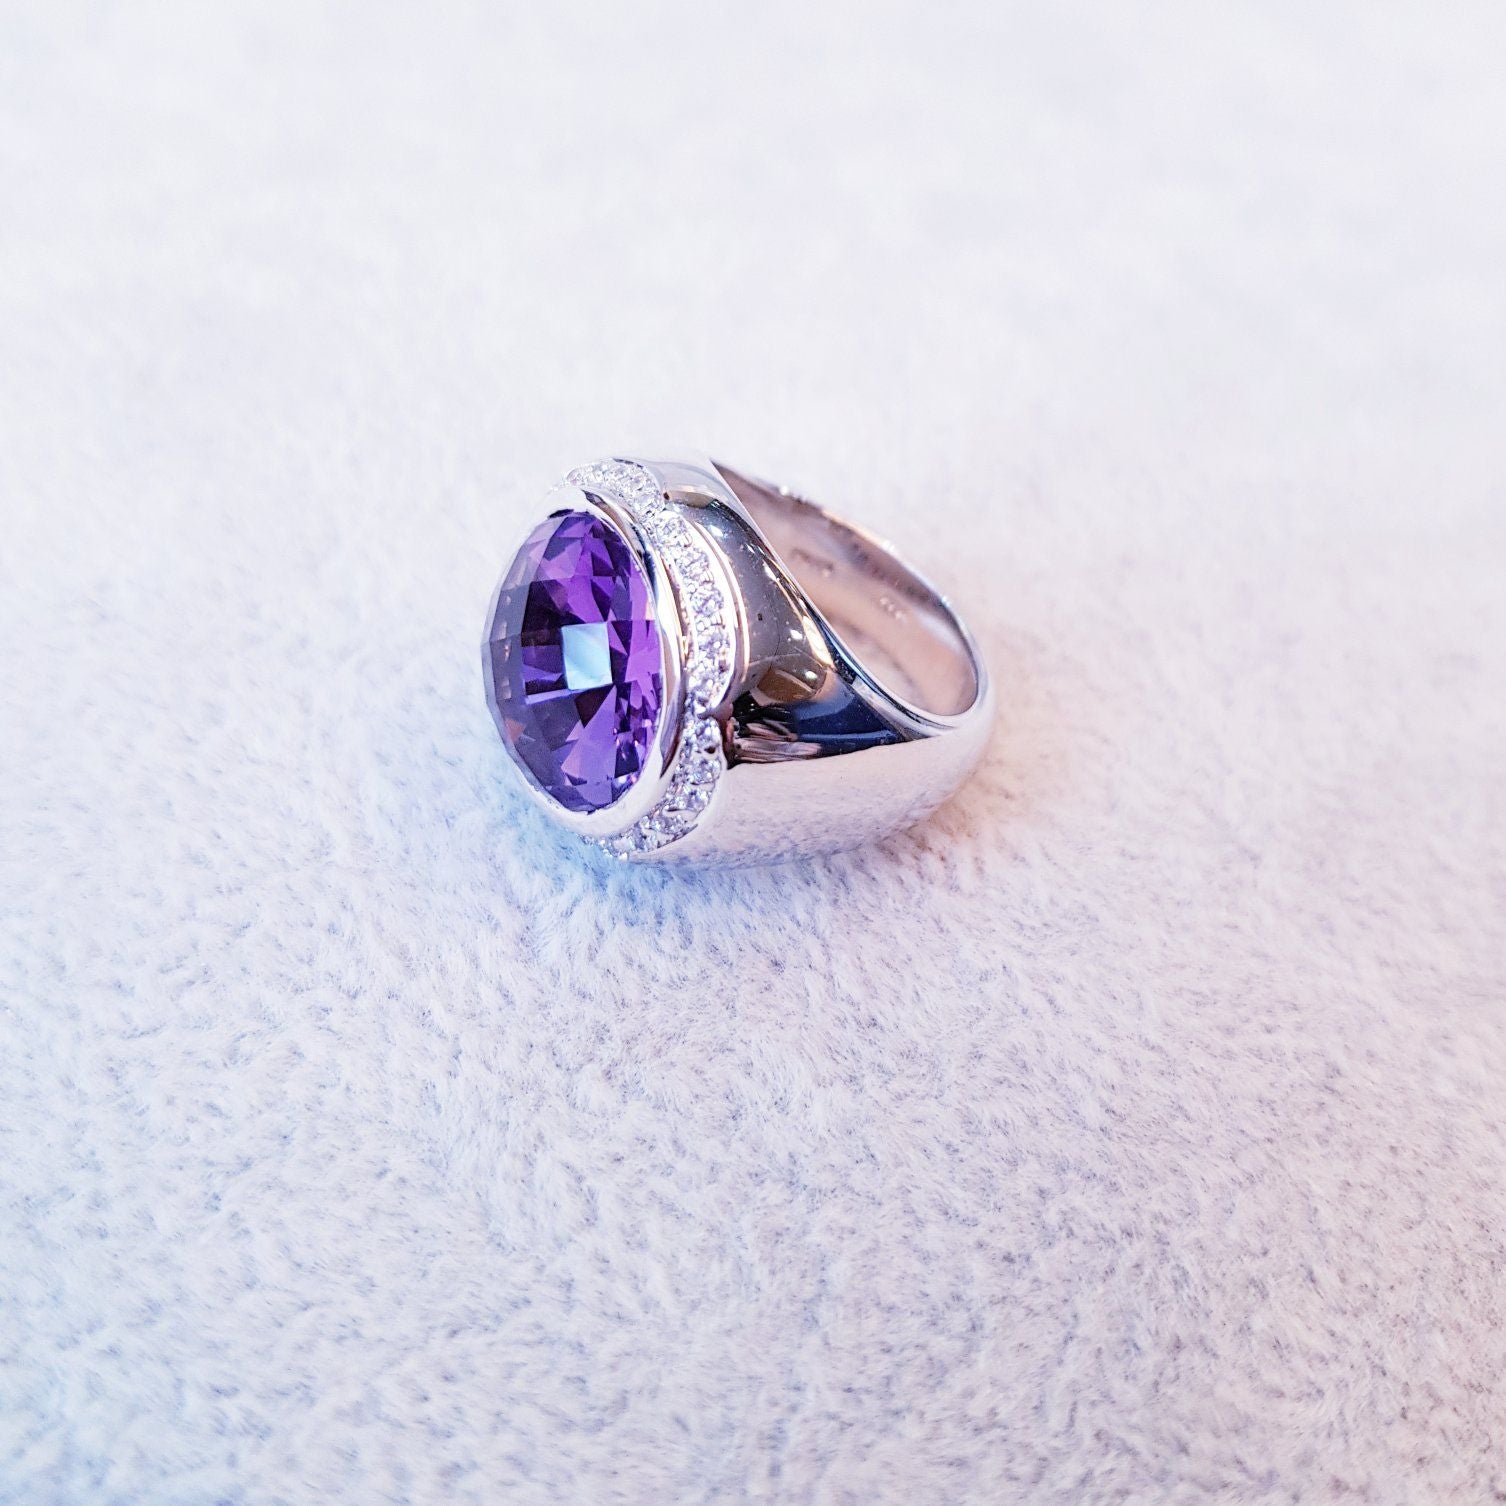 Faceted Round Amethyst Ring